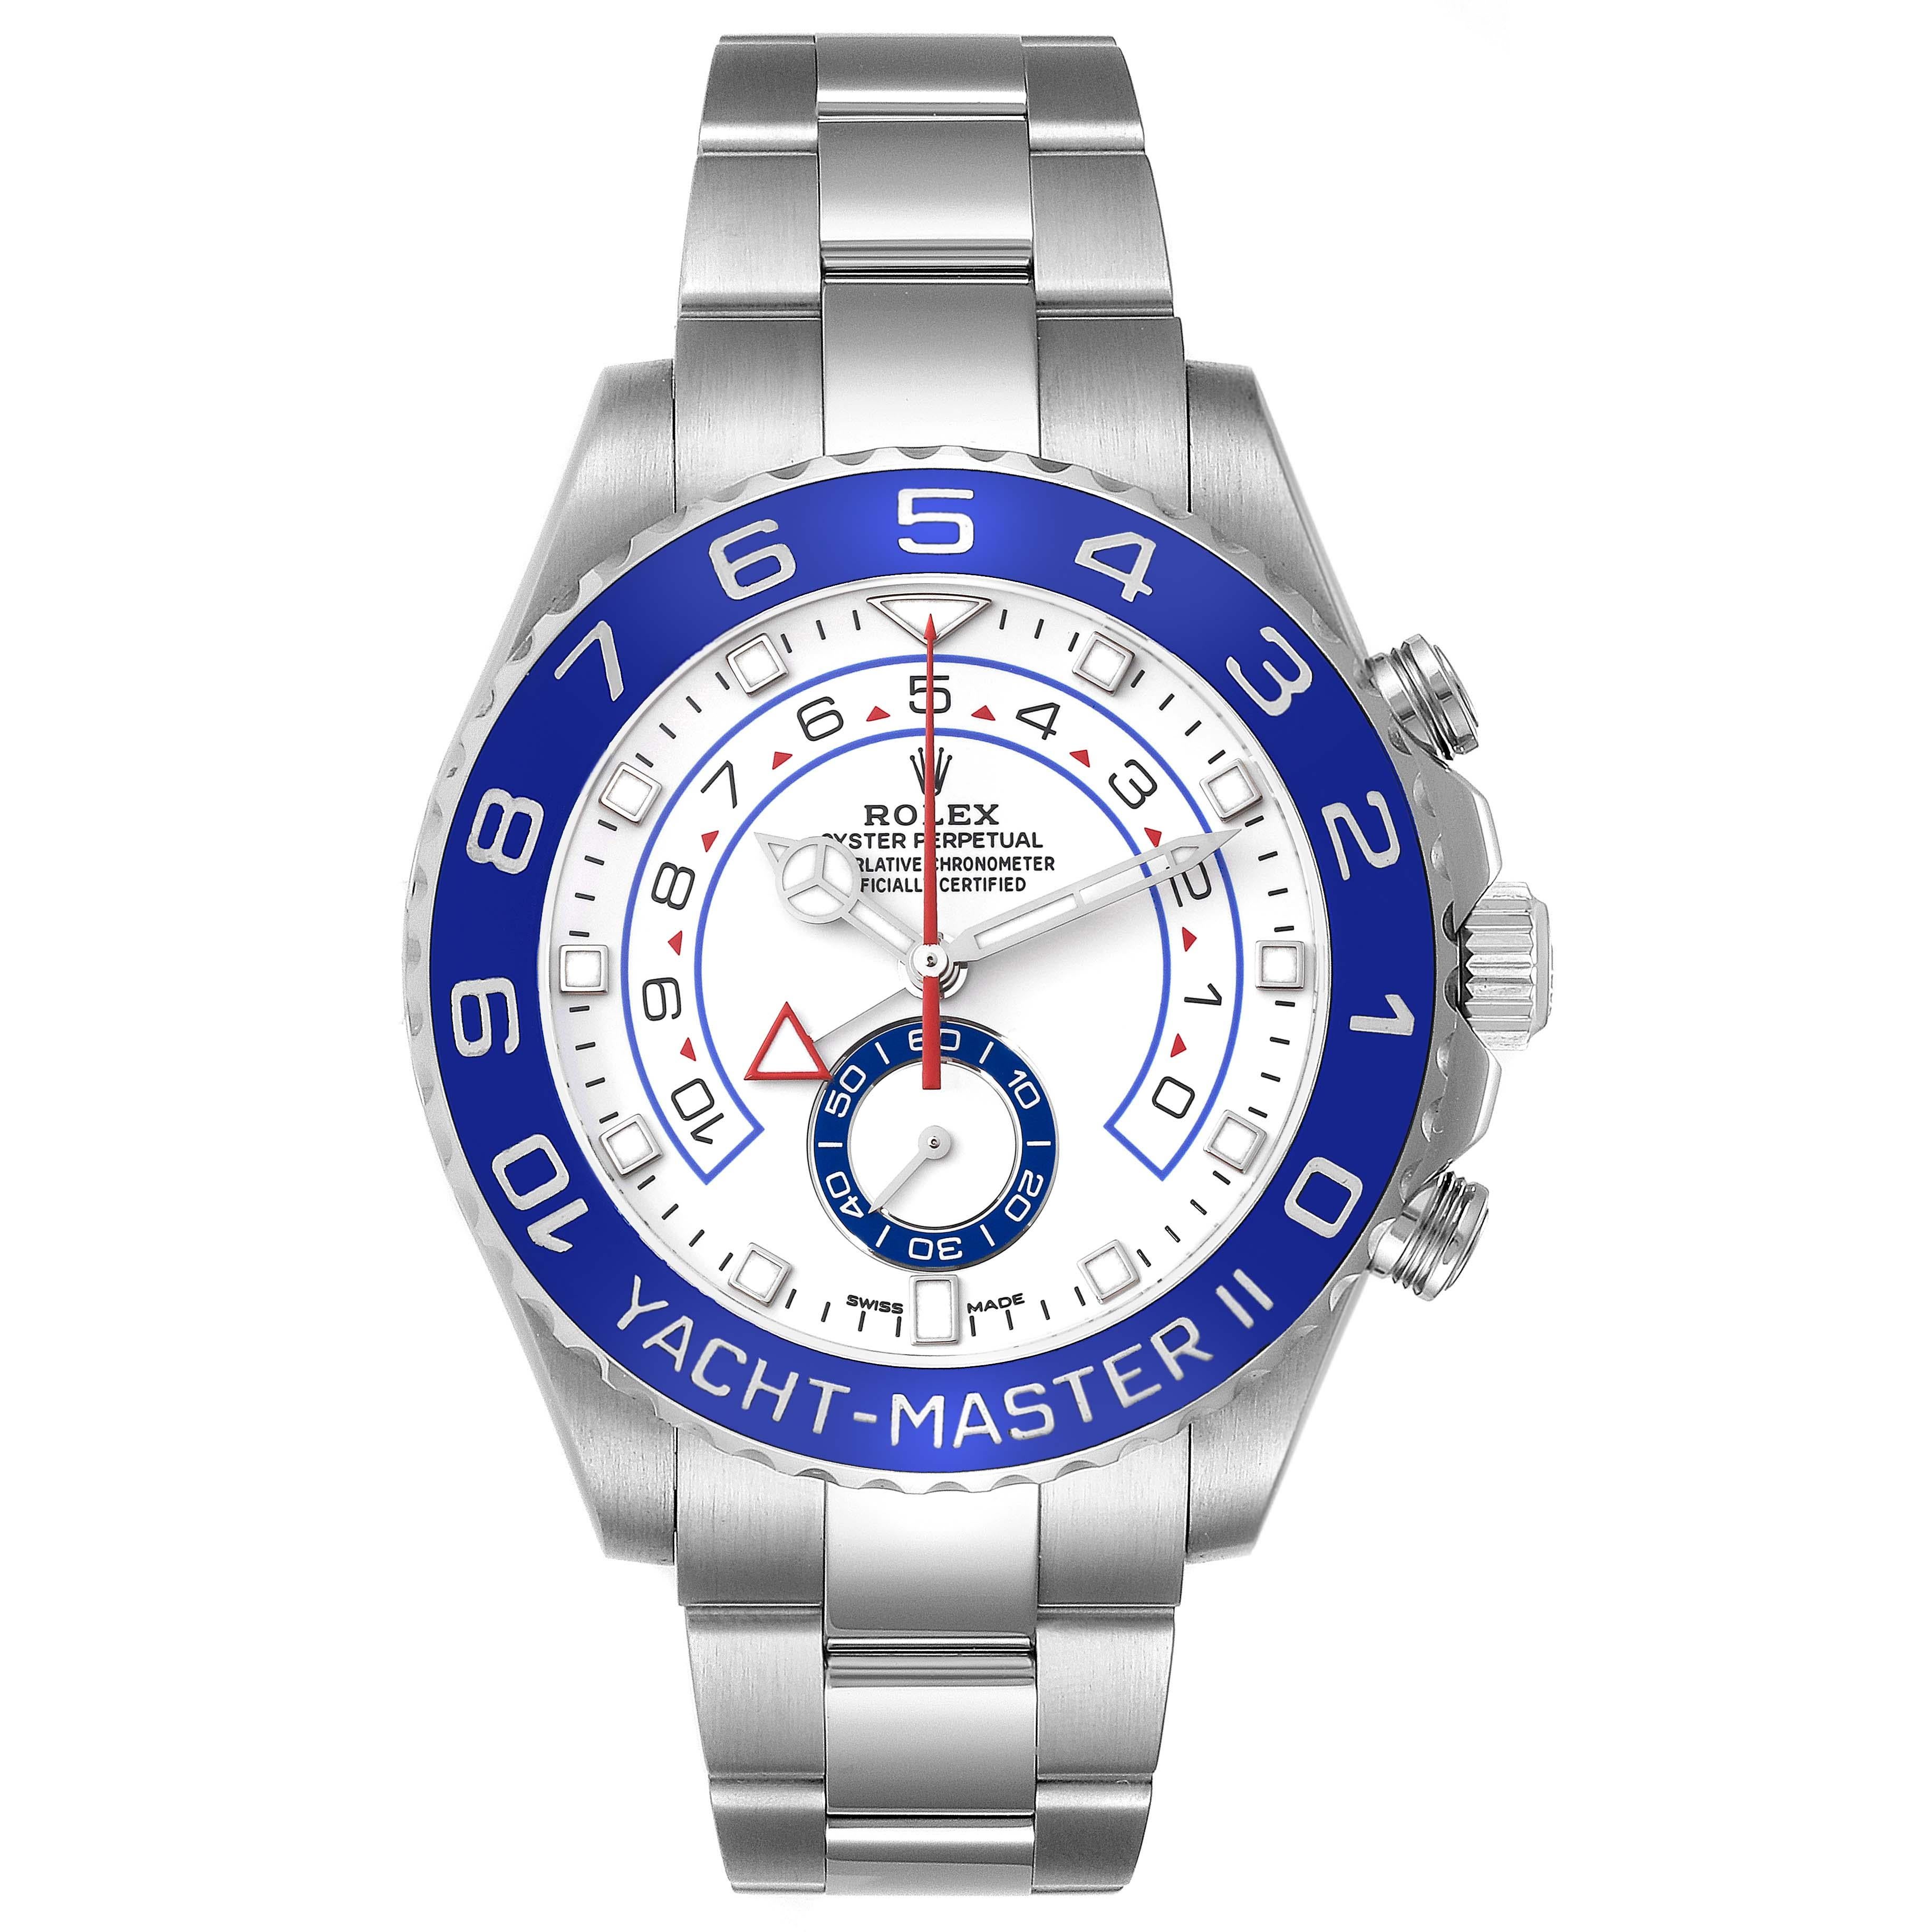 Rolex Yachtmaster II 44 Blue Cerachrom Bezel Steel Mens Watch 116680. Officially certified chronometer automatic self-winding movement with Regatta chronograph function. Stainless steel case 44.0 mm in diameter. Screw down crown and caseback. Rolex